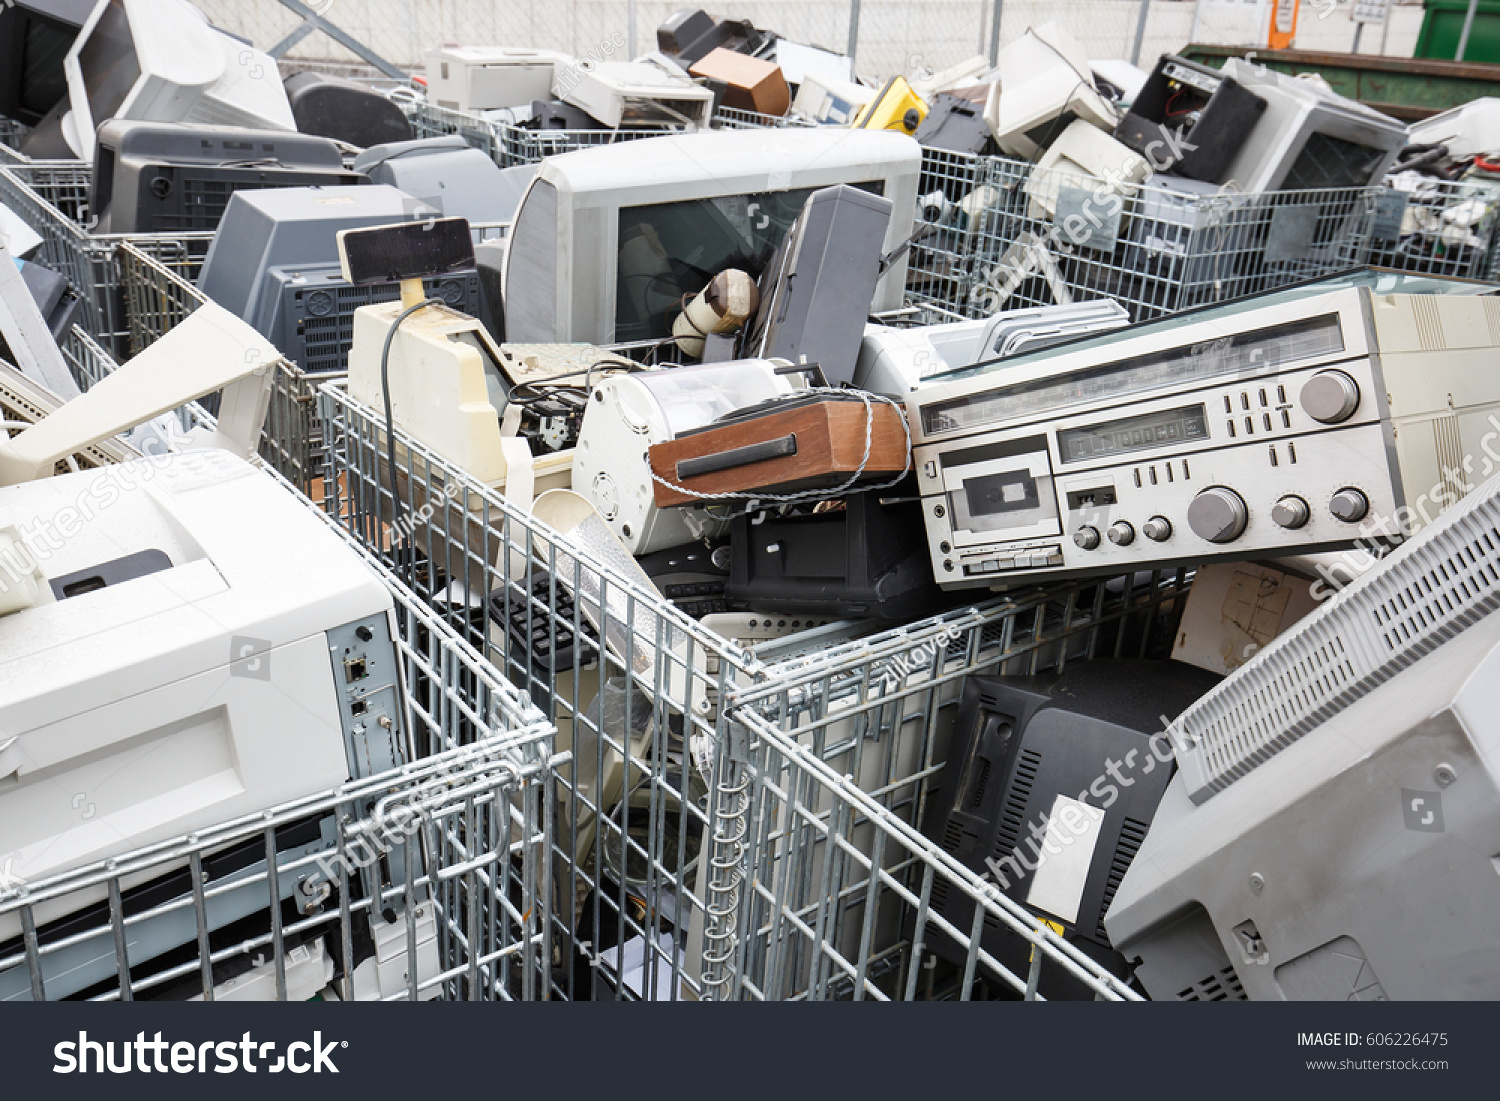 Electronic devices dump site. E-waste disposal, management, reuse, recycle and recovery concept. Electronic consumerism, globalization, raw material source concept. 
 #606226475